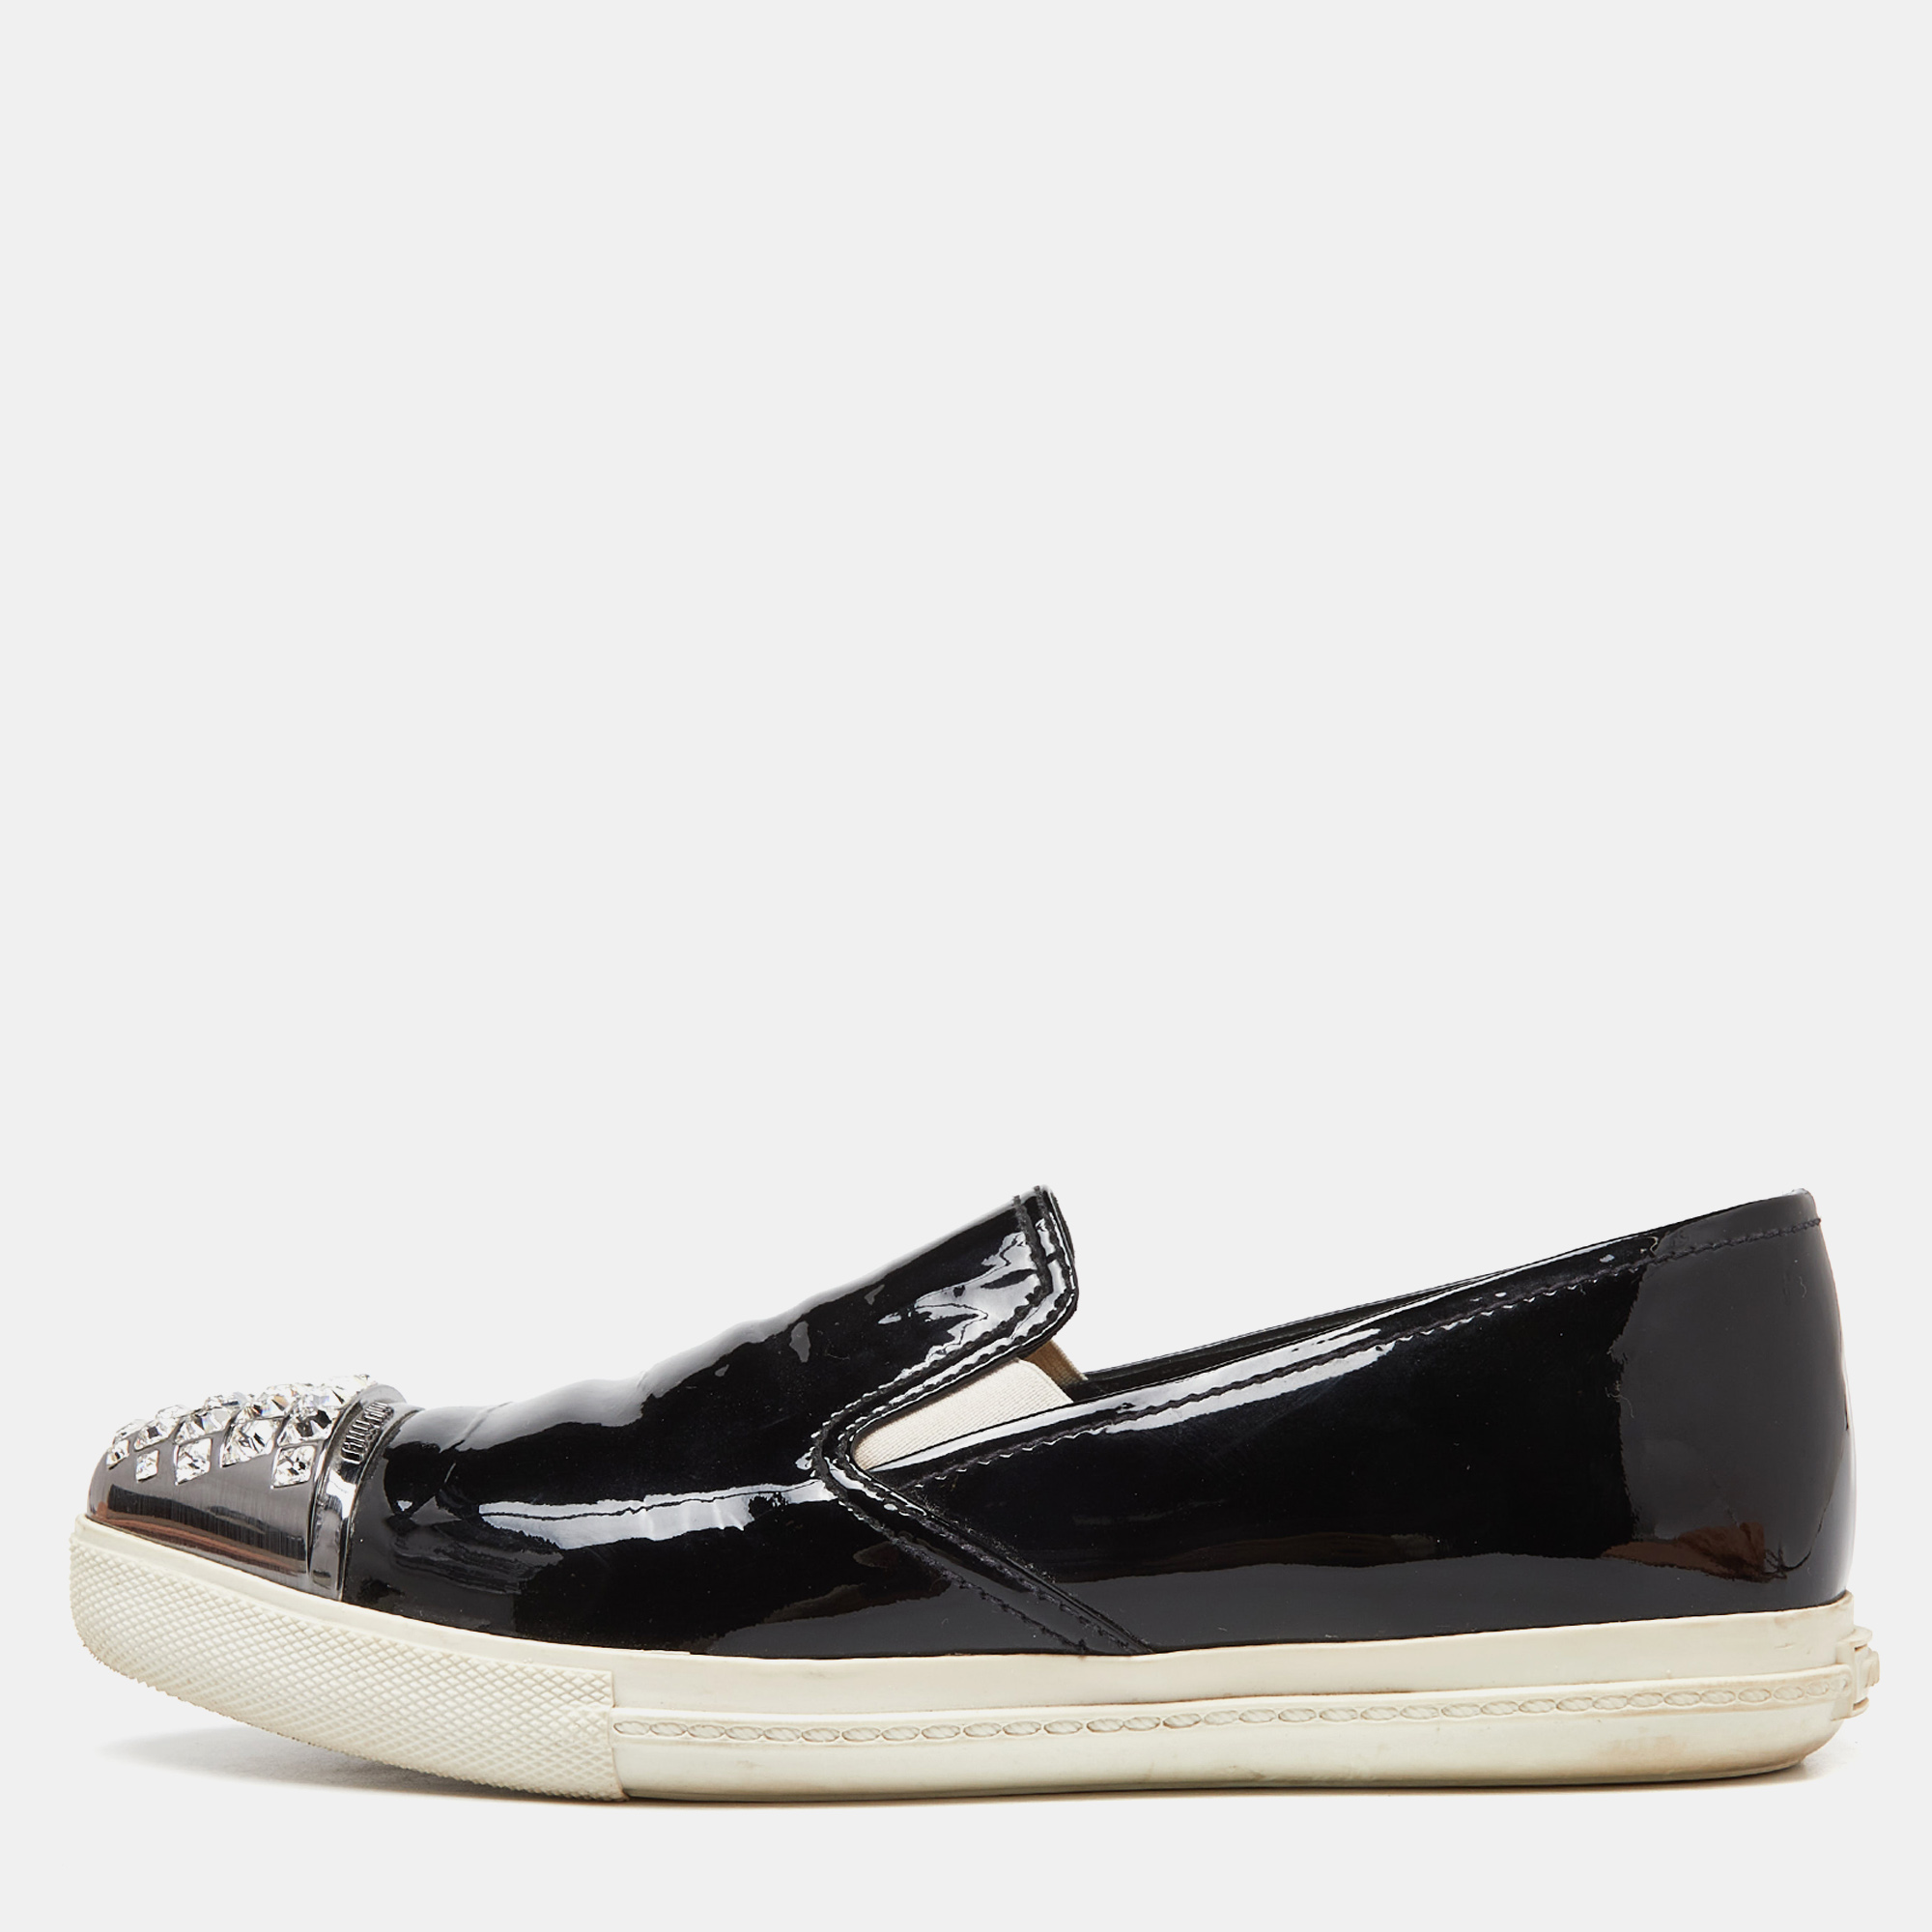 

Miu Miu Black Patent Leather Crystals Embellished Slip On Loafers Size